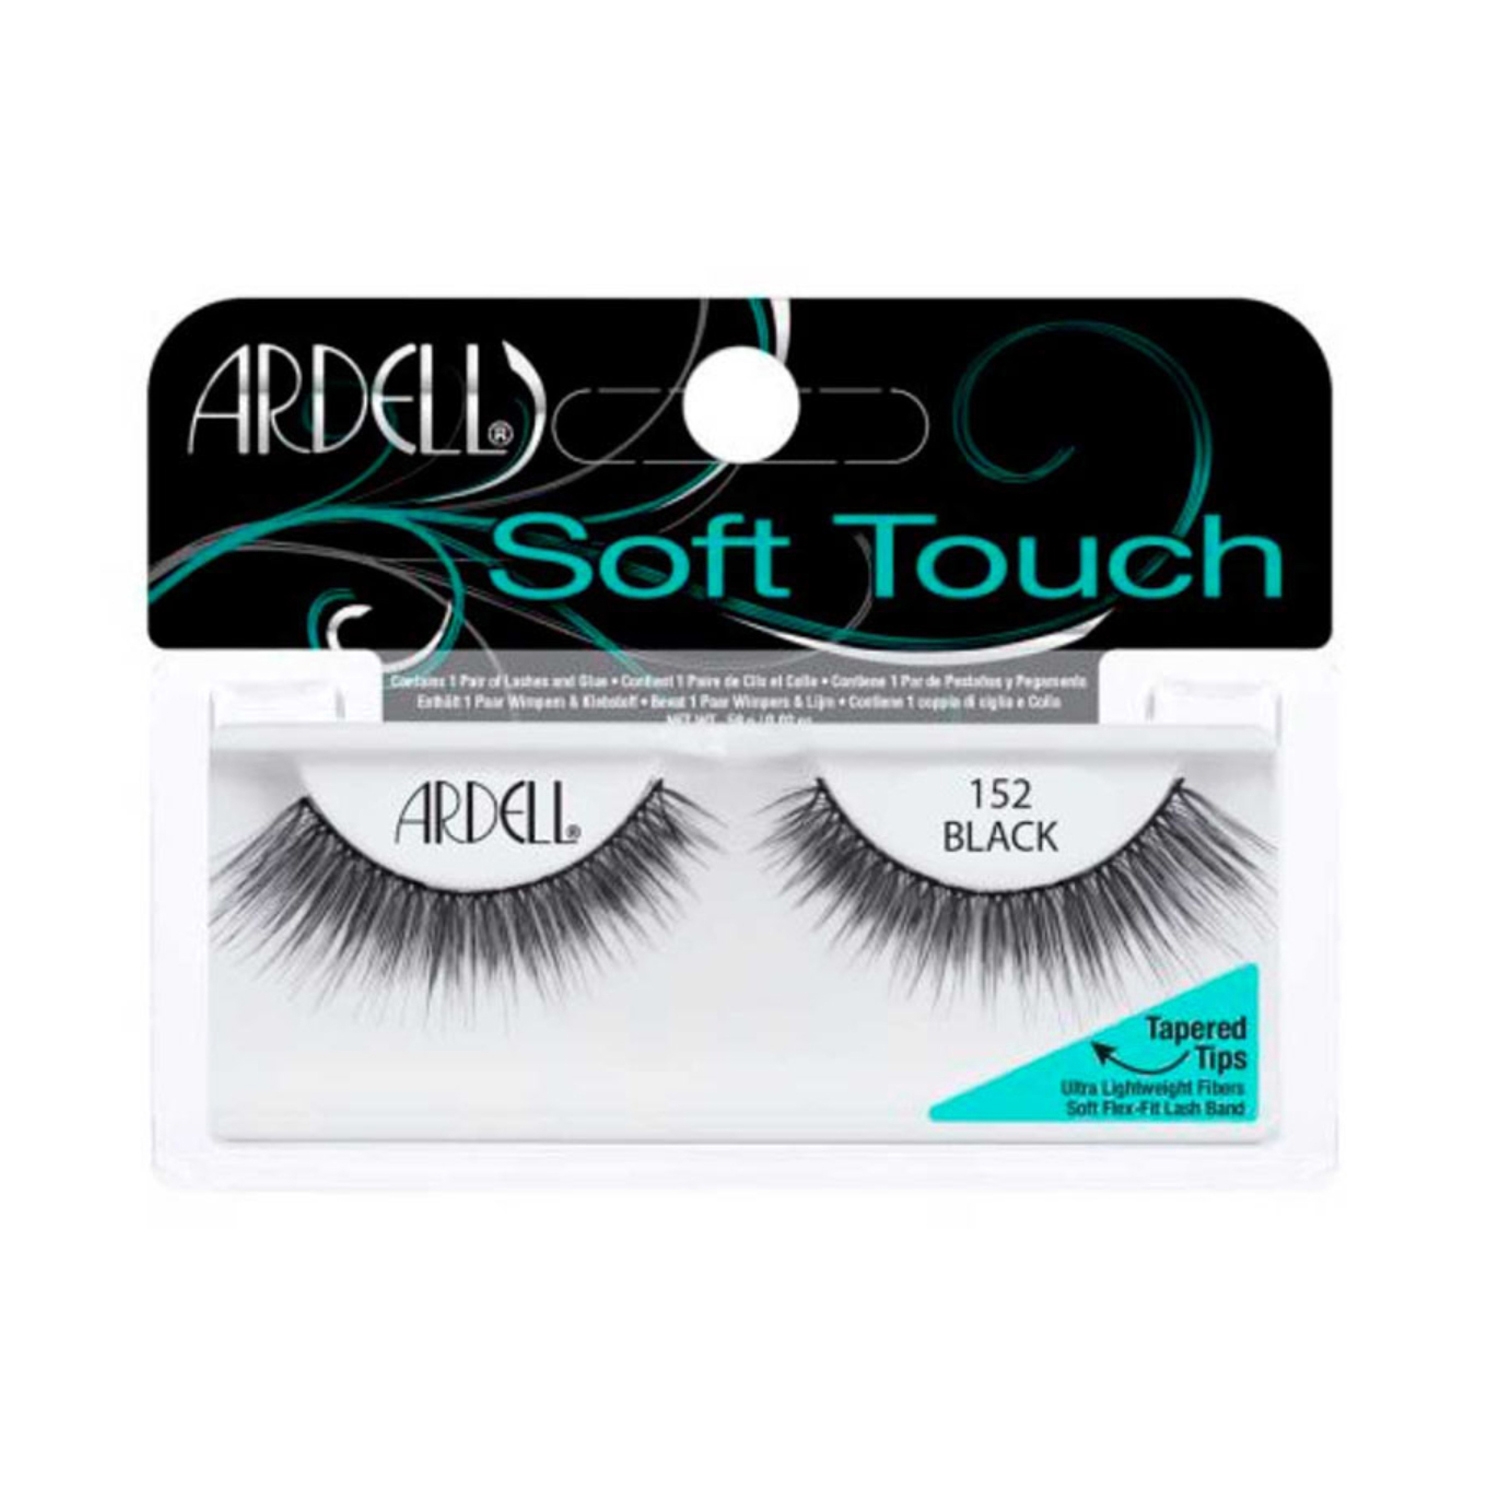 Ardell | Ardell Soft Touch Eyelashes 152 Black - 65216 (1 Pair)